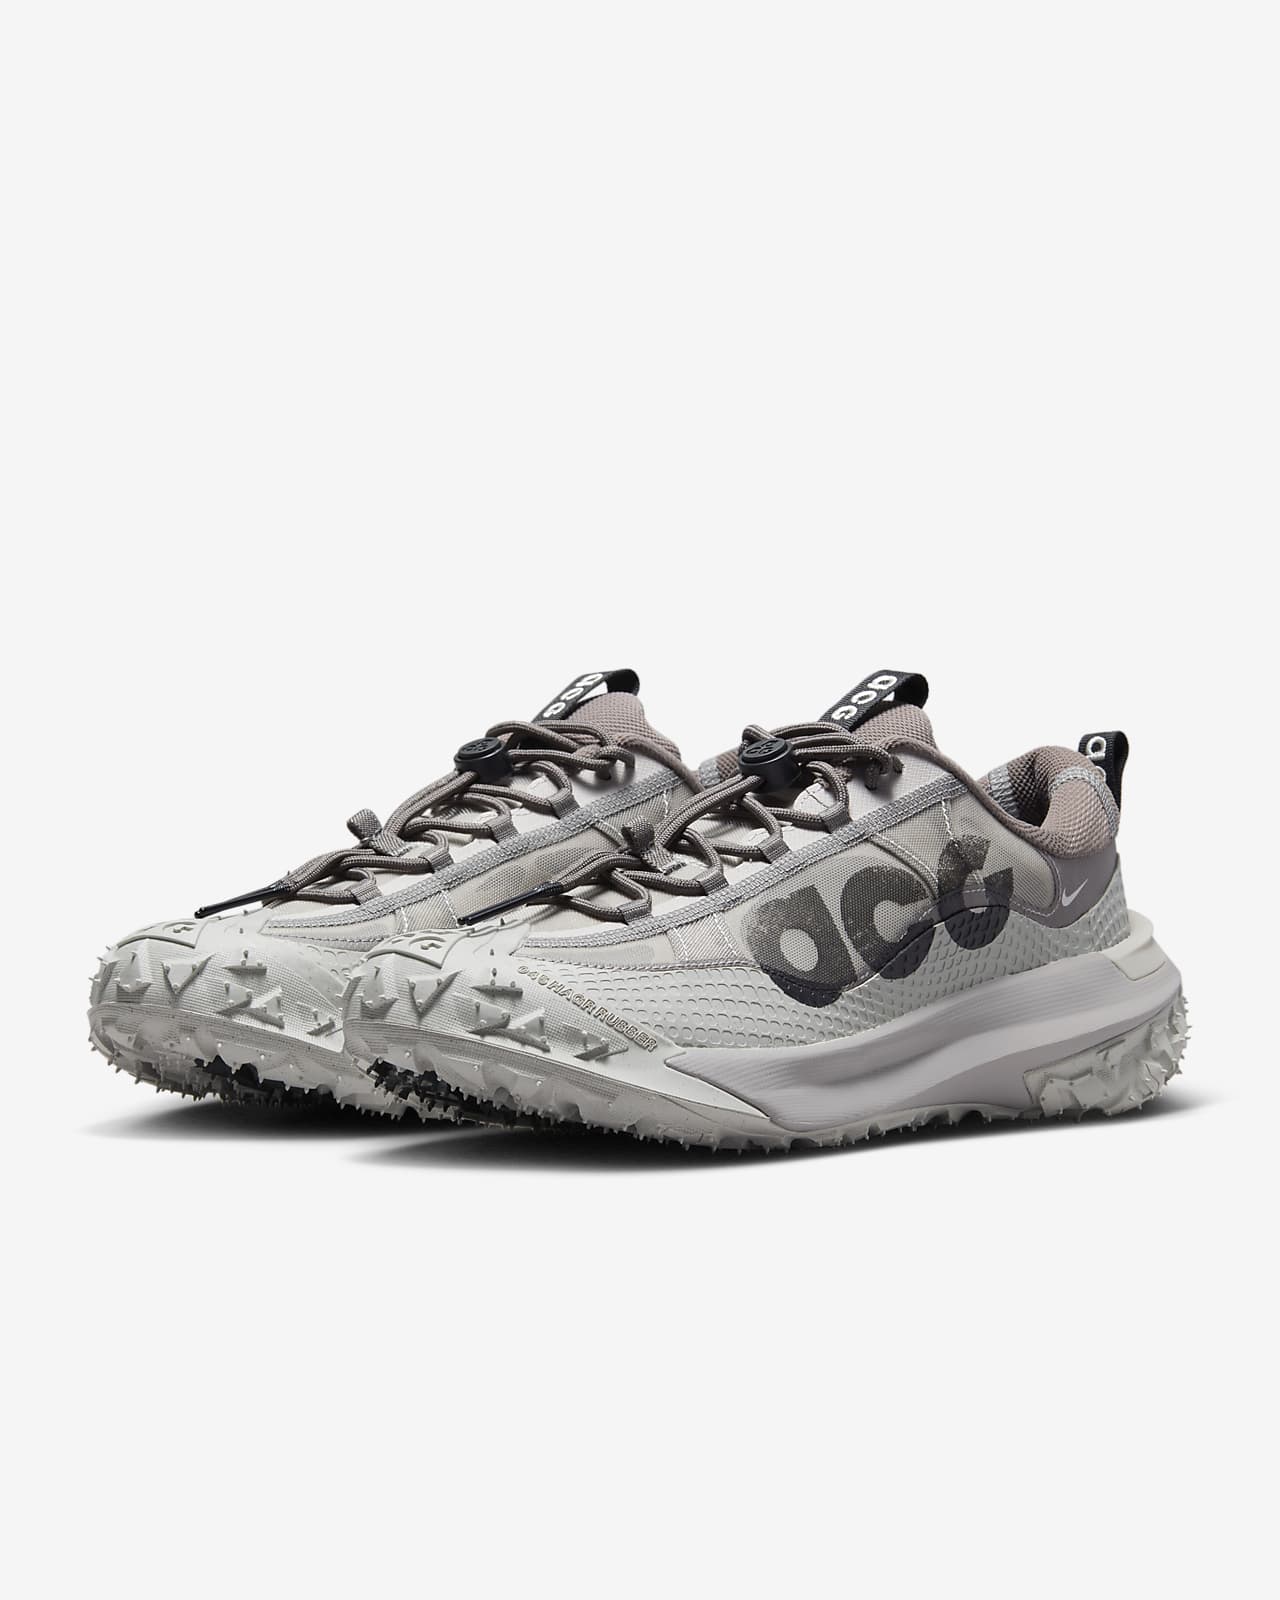 SALE公式 NIKE ACG MOUNTAIN FLY 2 LOW マウンテン フライ - 靴